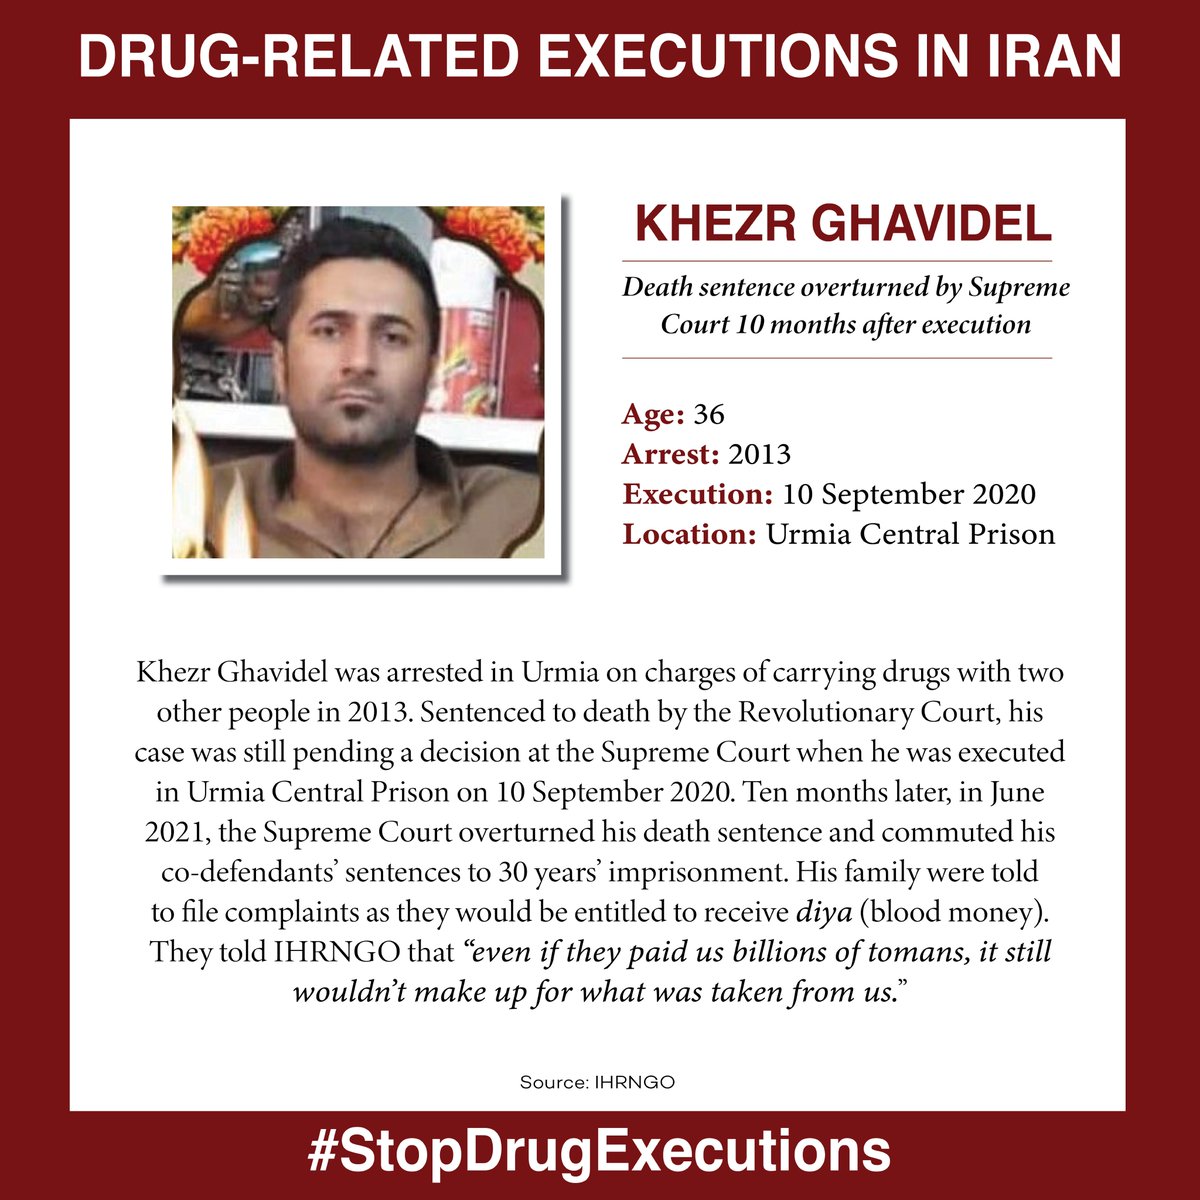 His name was #KhezrGhavidel, a 29-year-old man arrested in 2013 and sentenced to death for drug-related charges by the Revolutionary Court in a case with multiple defendants. Khezr was executed on 10th September 2020 while his case was still pending at the Supreme Court. 10